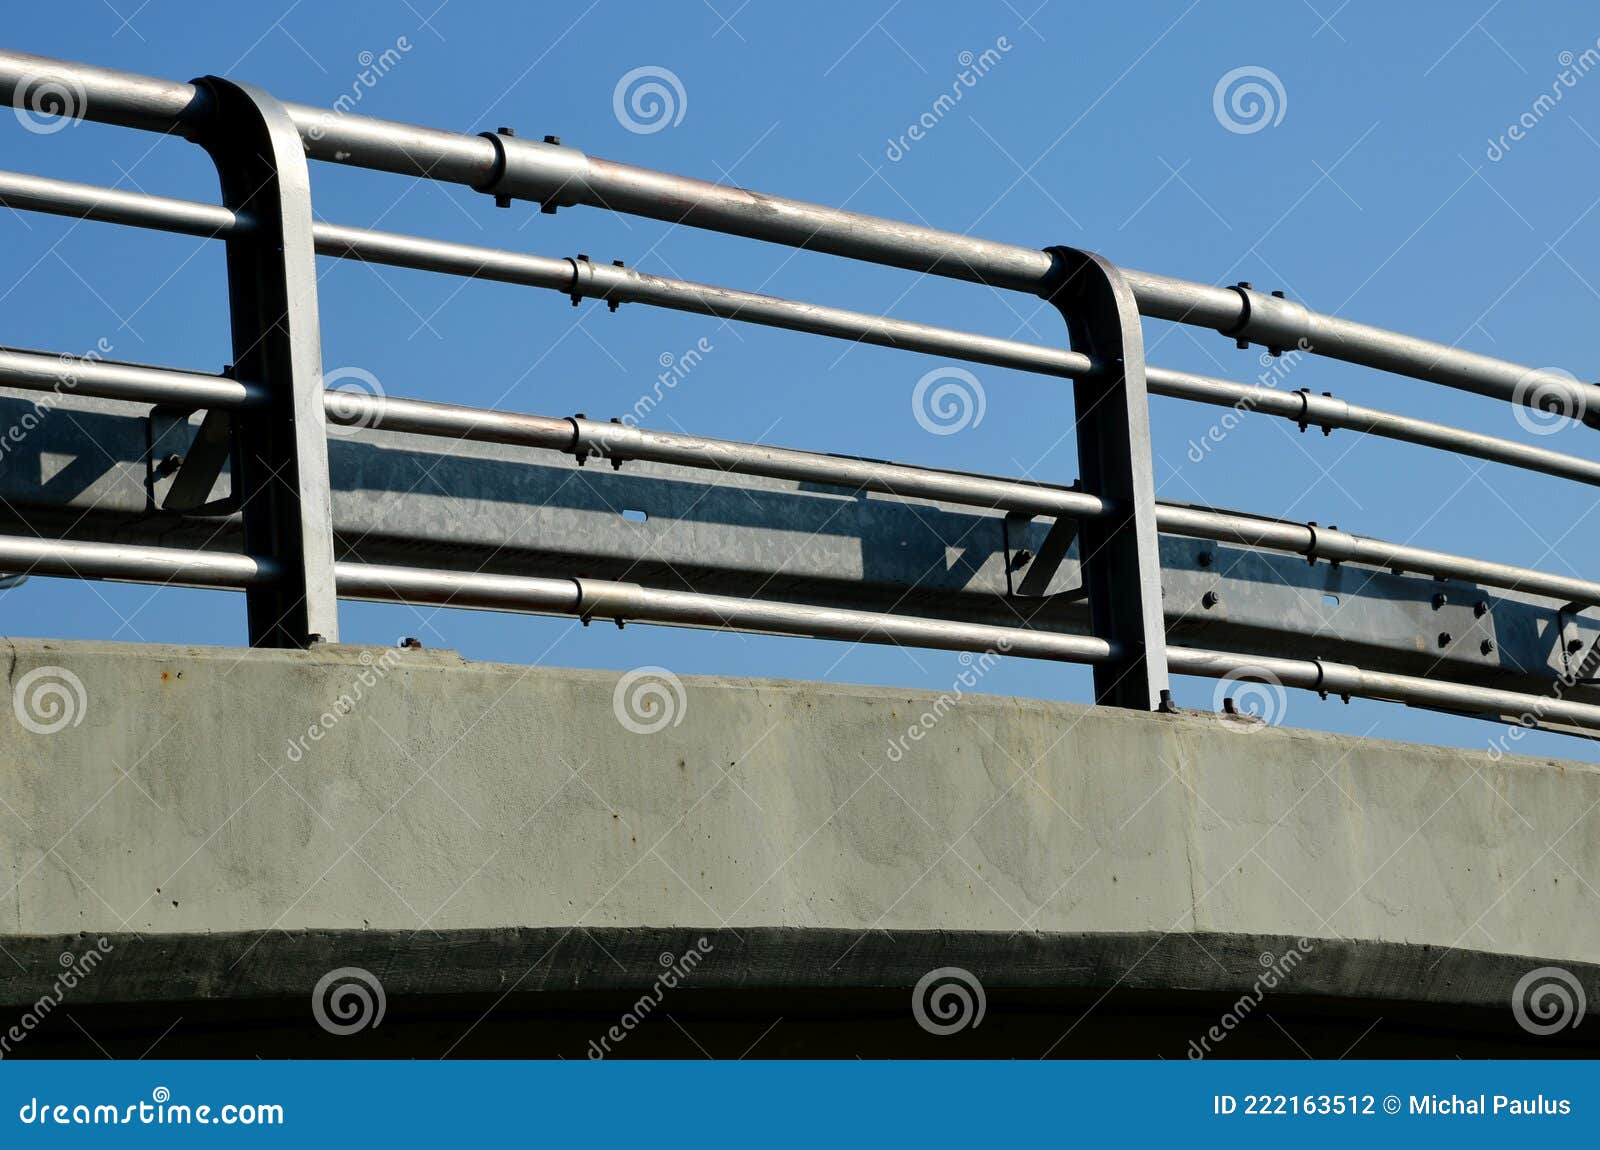 View of the Highway Overpass Where the Railing is Formed by Several ...